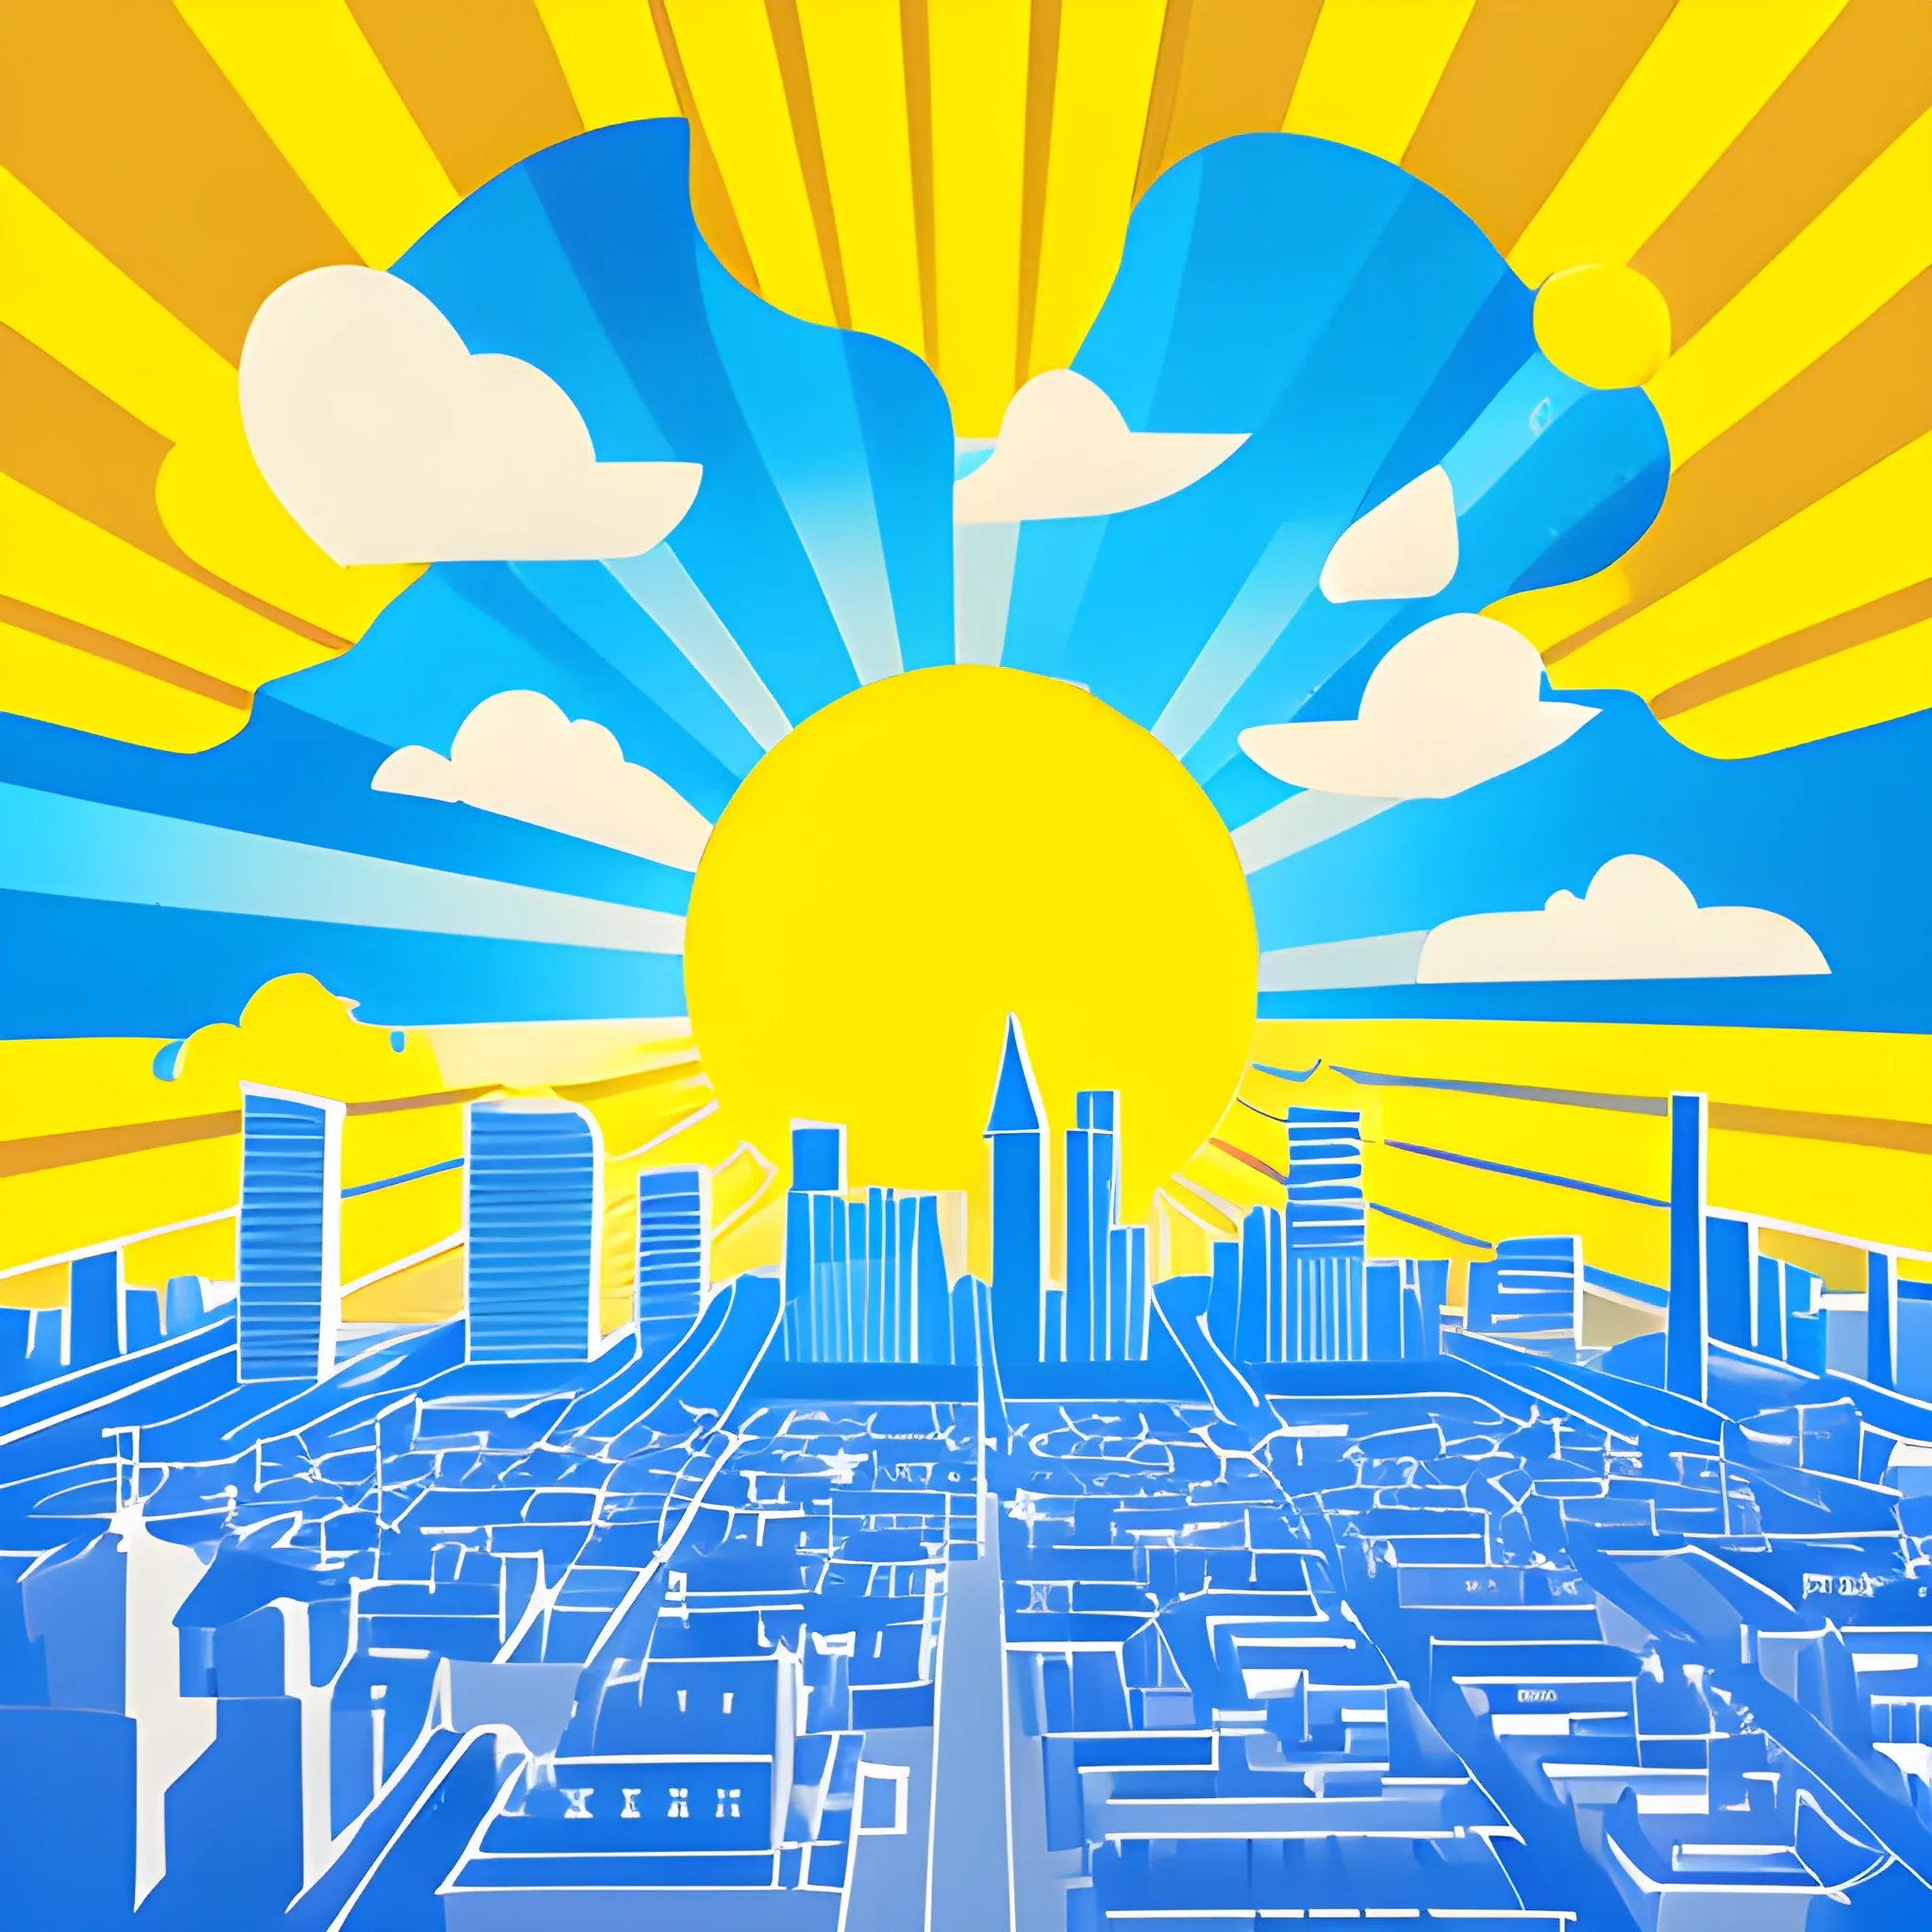 flat stlye artwork, city with the blue sky on top and yellow sun, semi-transparent sunrays, light clouds
